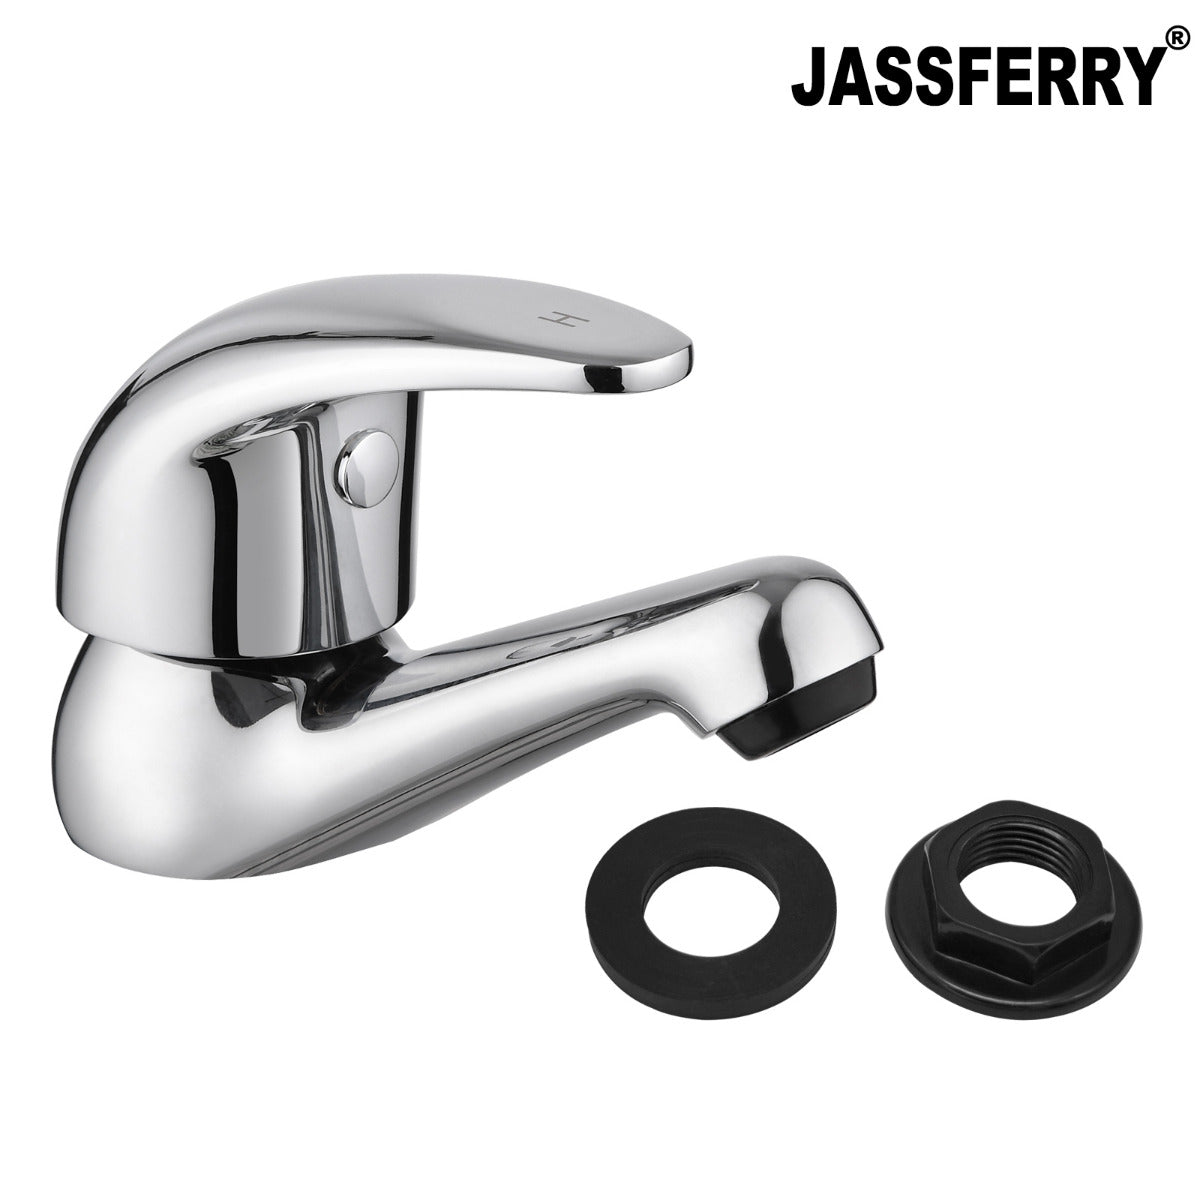 JassferryJASSFERRY Bathroom Sink Taps Lever Basin Taps Chrome-Plated Hot and Cold WaterBasin Taps